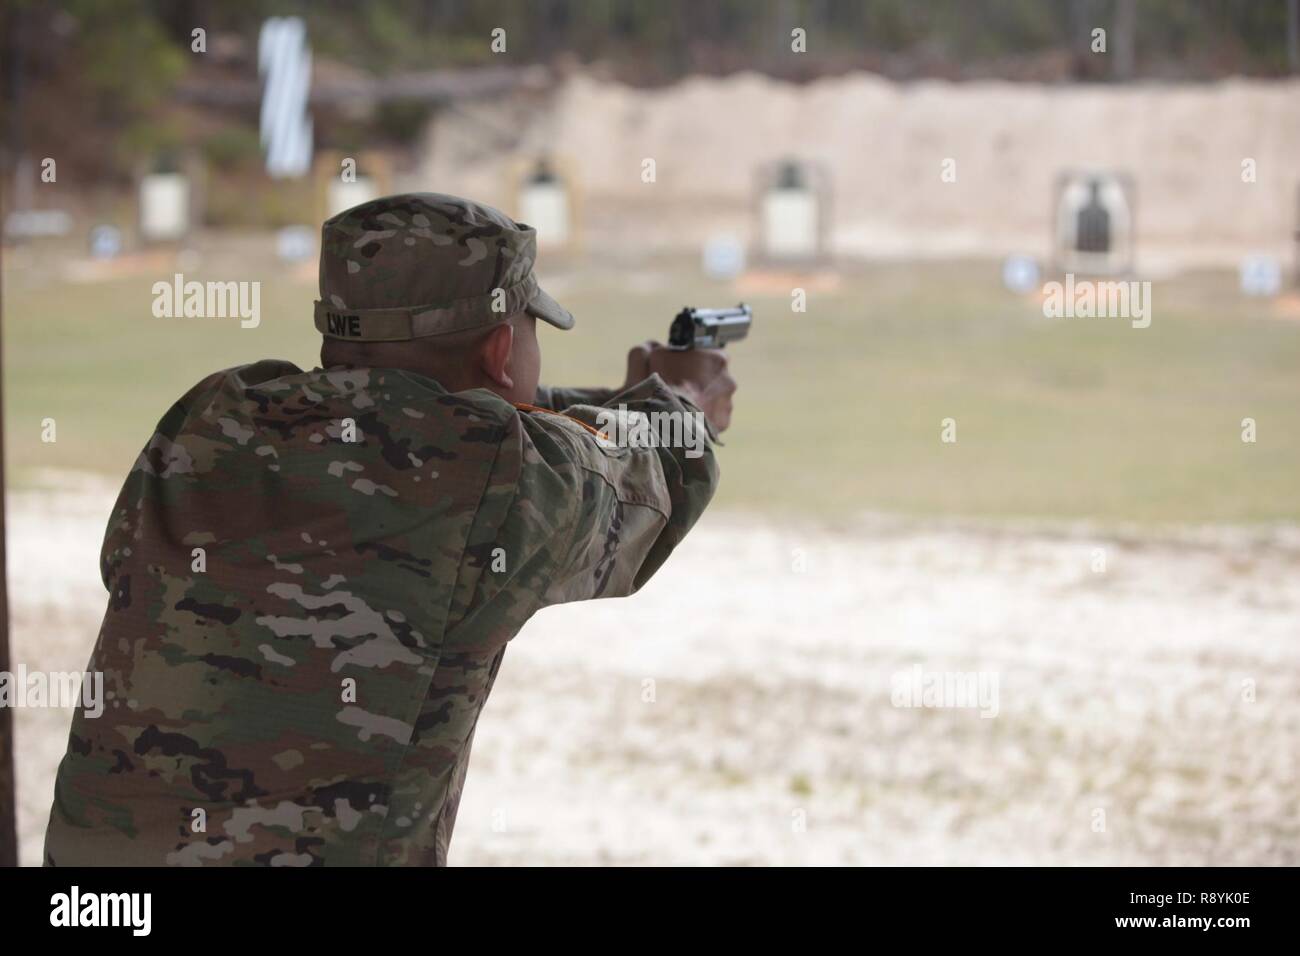 U.S. Army 2nd Lieutenant Daniel Lwe, attached to the 982D Combat Camera Company (Airborne), qualifies with the 9M at a range on Fort Jackson, S.C., March 18, 2017. The 982nd Combat Camera Company (Airborne) is one of only two combat camera companies in the U.S. Army tasked with providing the Office of the Secretary of Defense, Chairman of the Joint Chiefs of Staff, and the military departments with a directed imagery capability in support of operational and planning requirements through the full range of military operations. Stock Photo